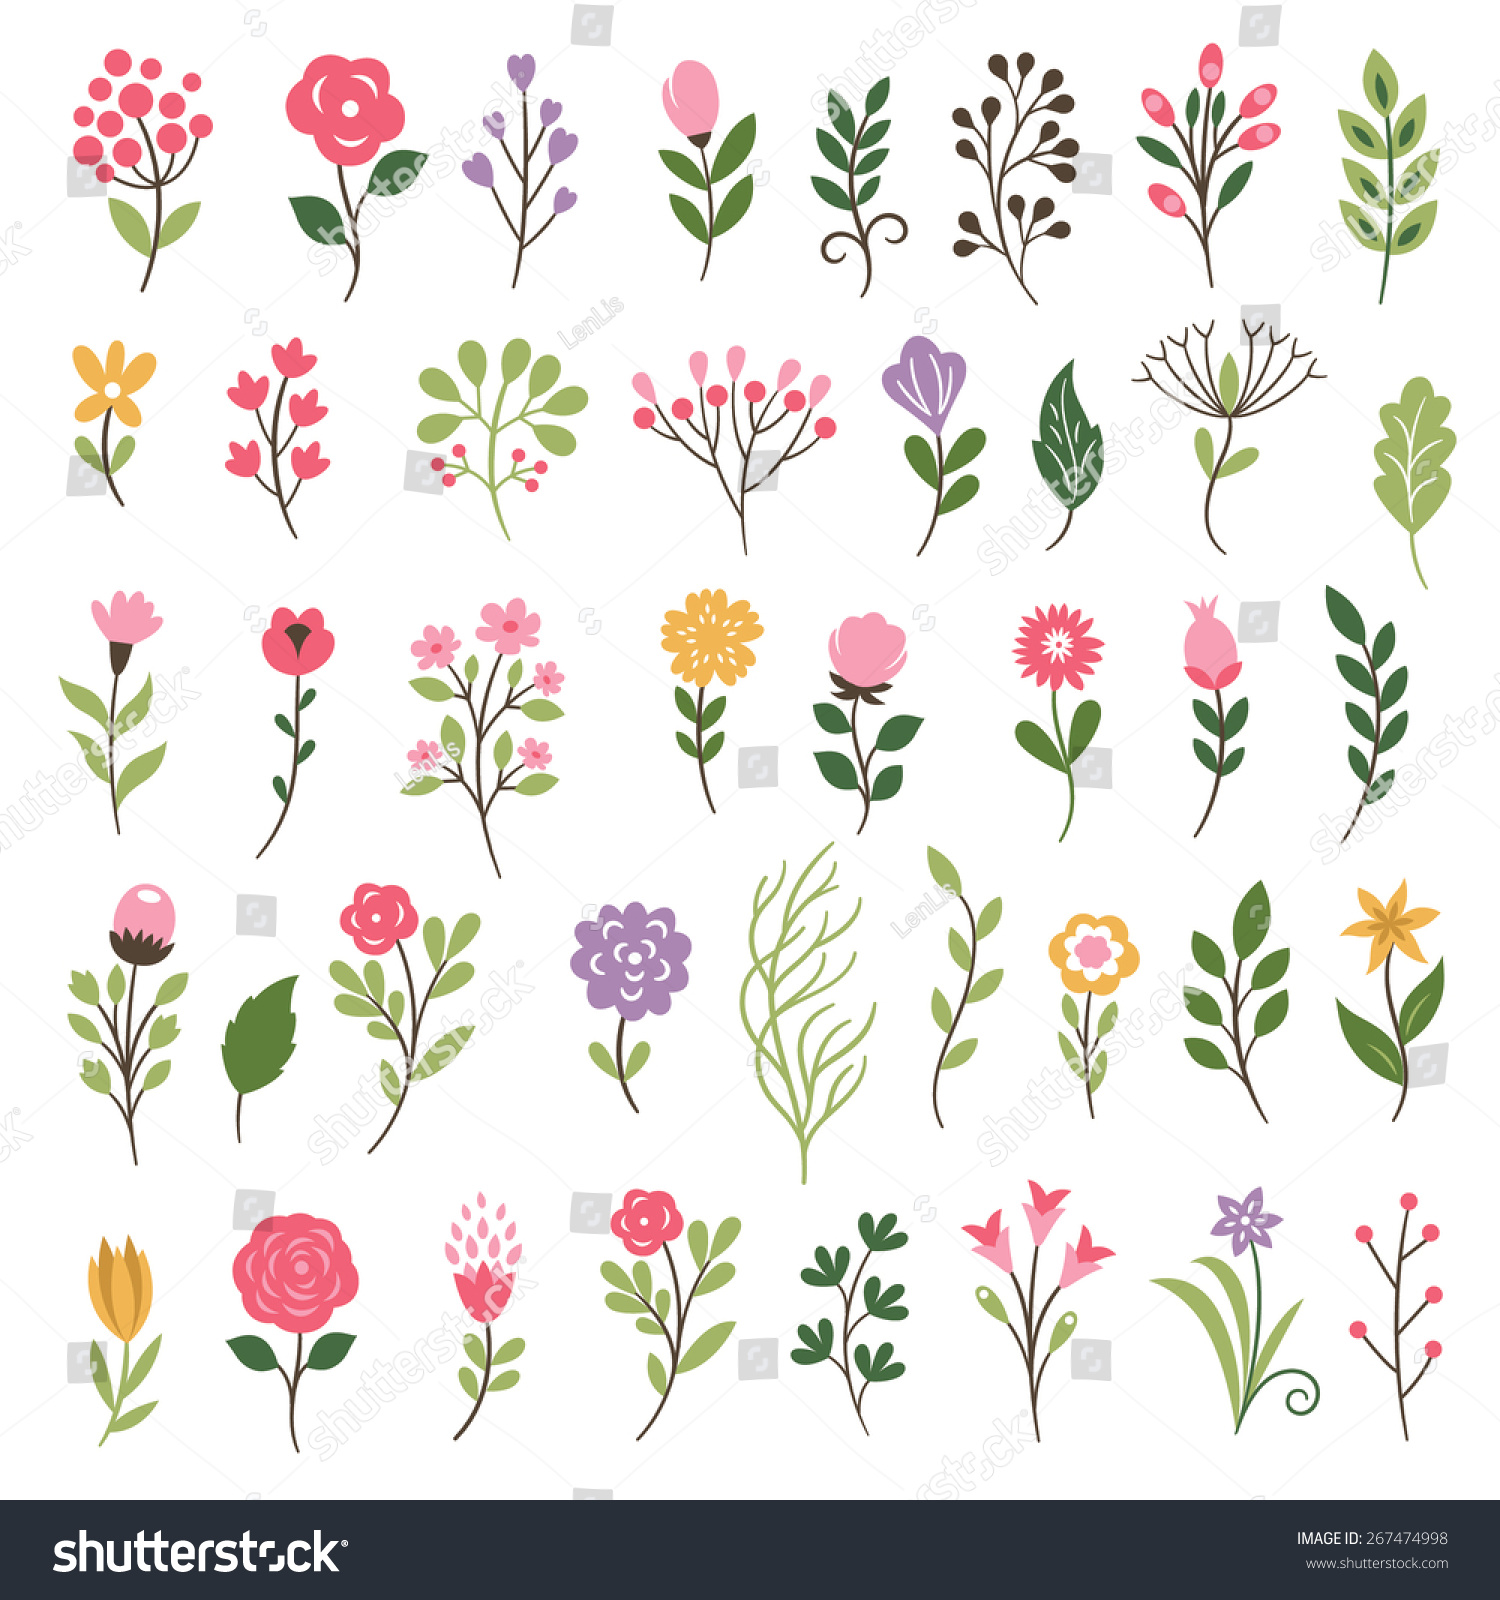 SVG of Colorful floral collection with   flowers and leaves svg